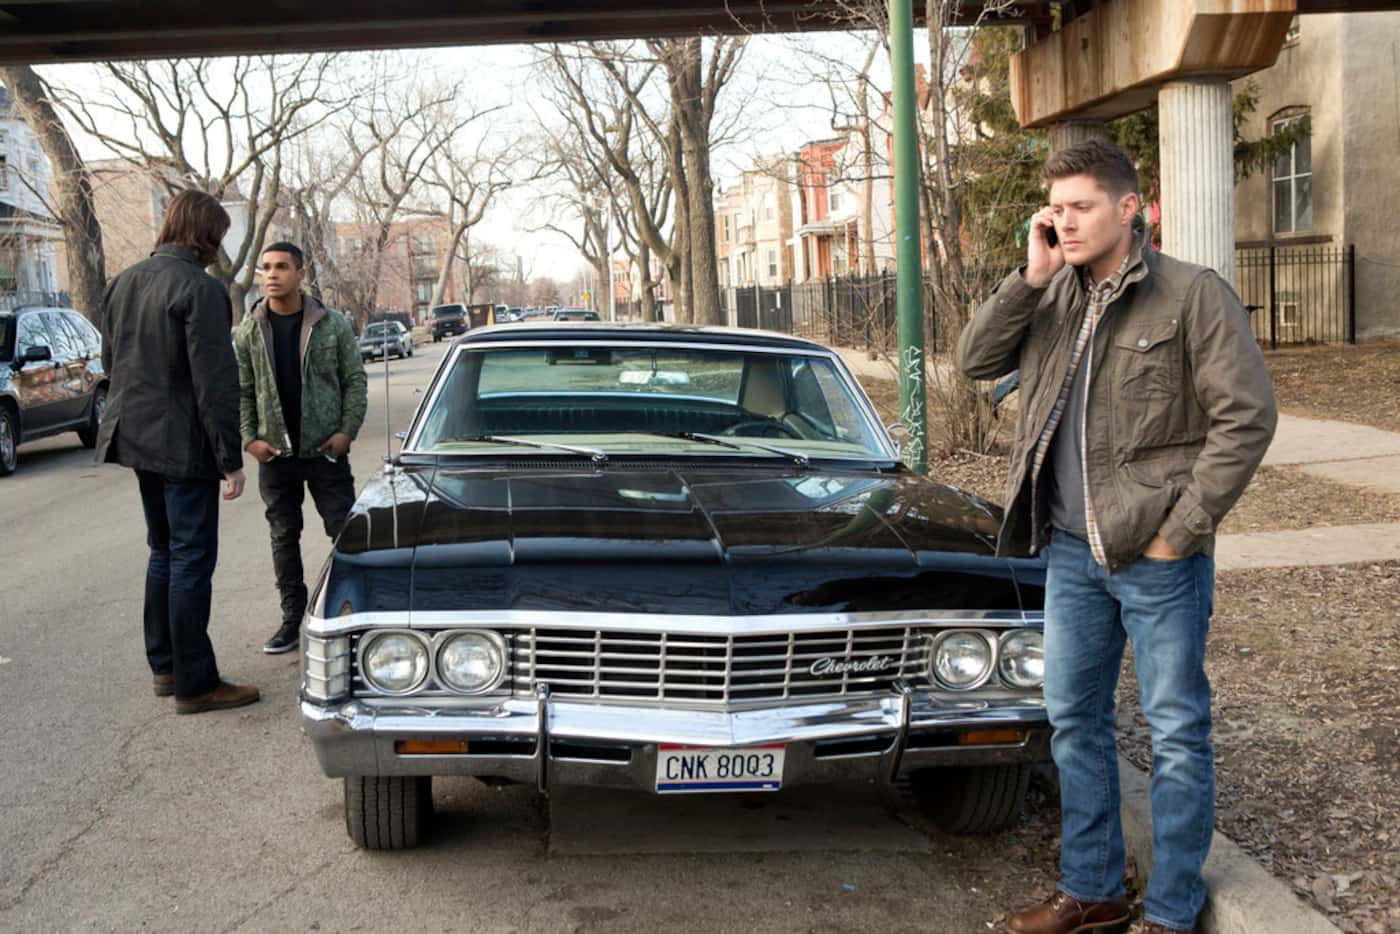 This is the proper way to use a cell phone while driving, says Jensen Ackles. Jared...